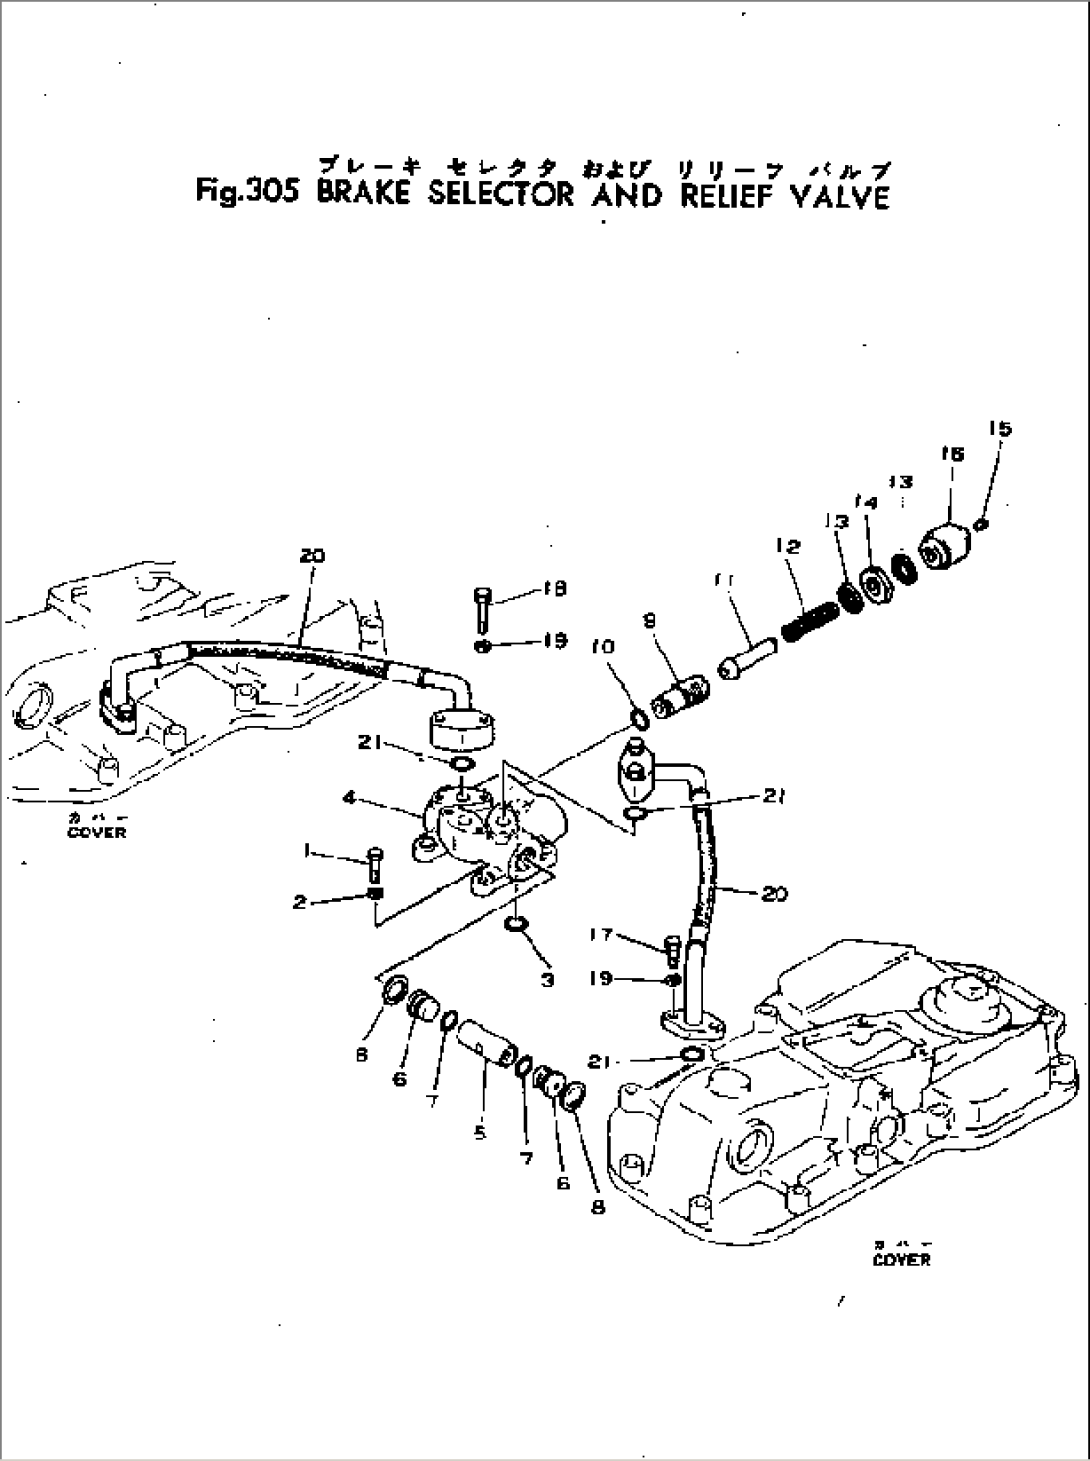 BRAKE SELECTOR AND RELIEF VALVE